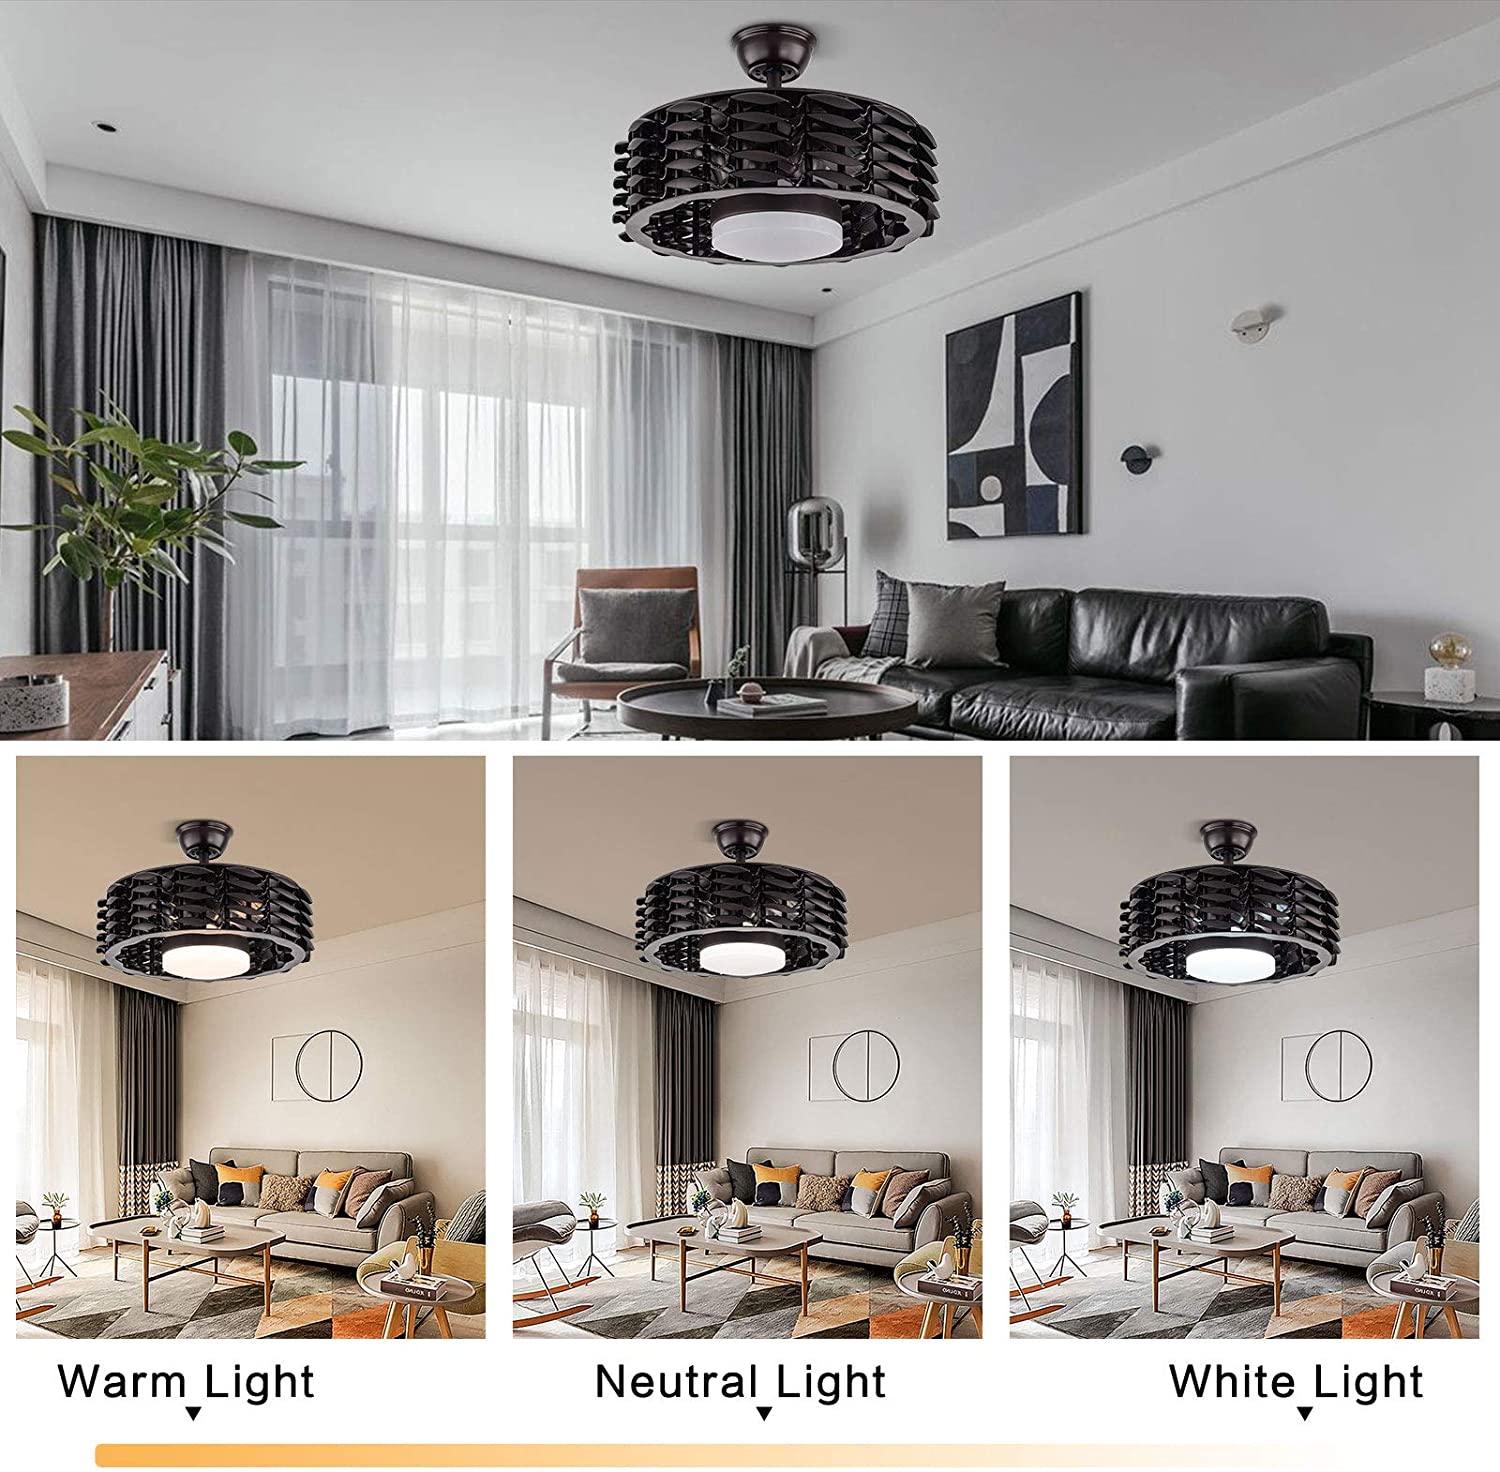 Anqidi 22 inch LED Chandelier Ceiling Lamp Fan-Bladeless Reversible 3 Color Dimmable - image 3 of 8